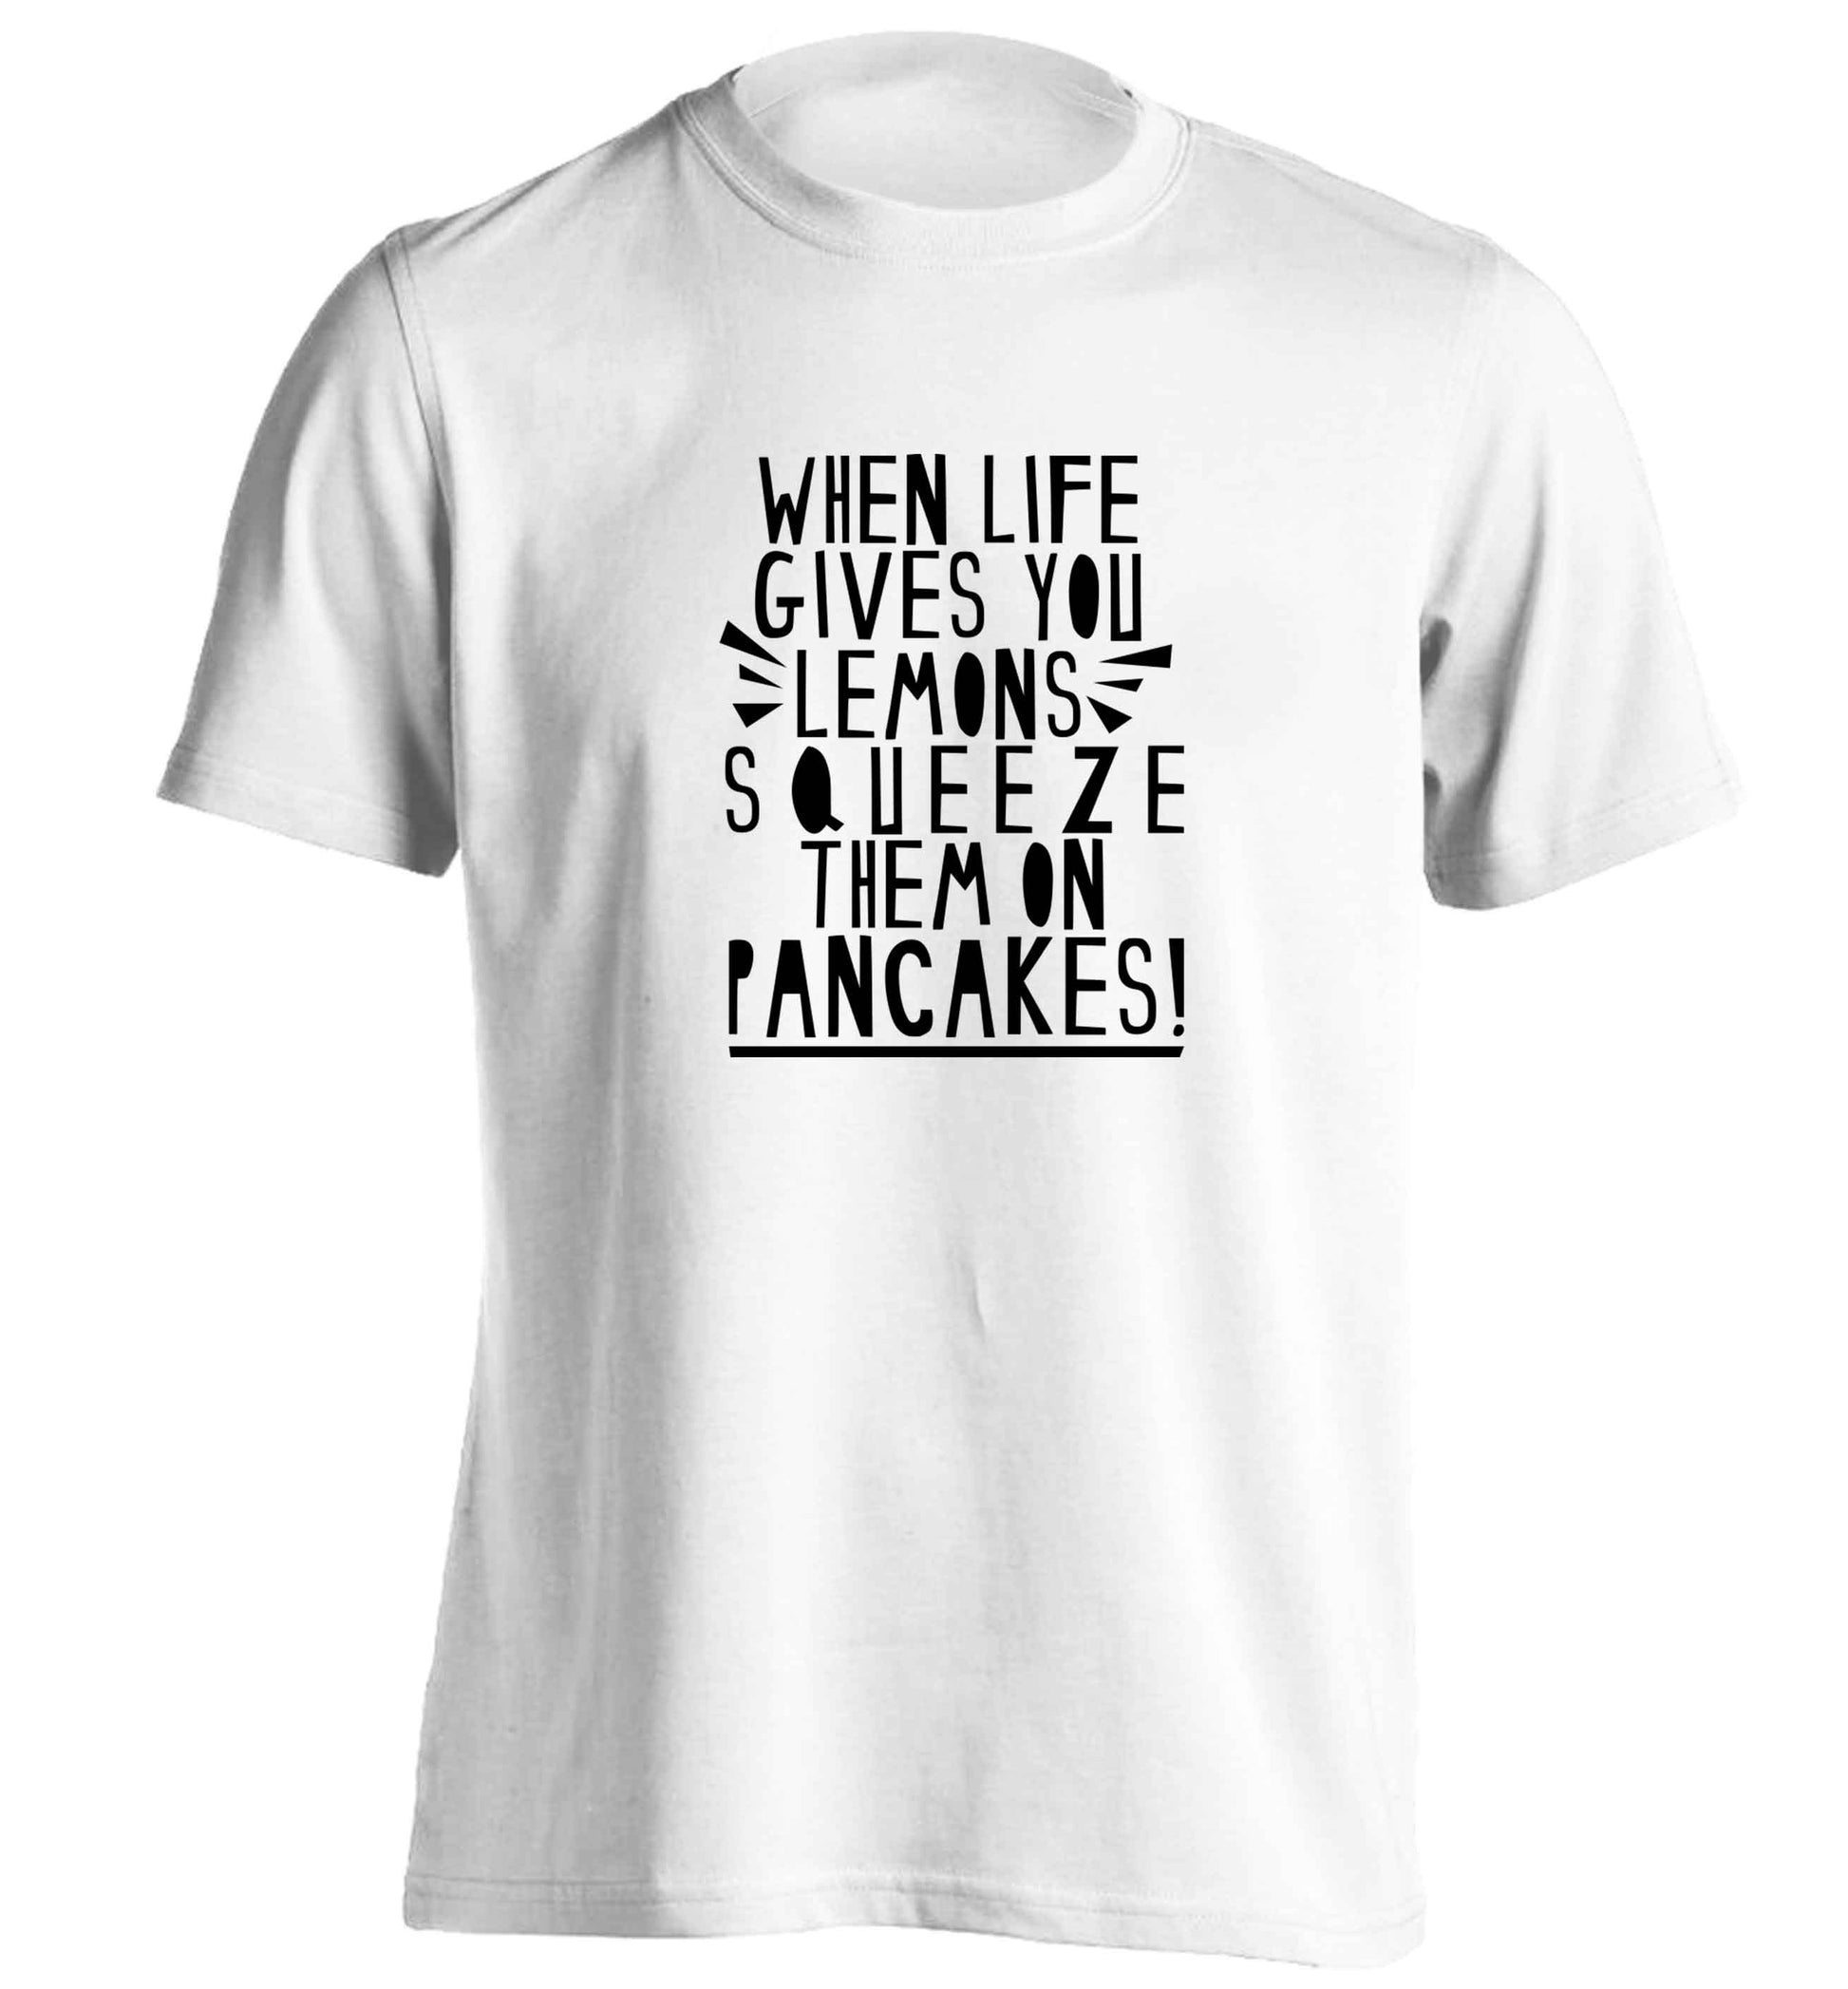 When life gives you lemons squeeze them on pancakes! adults unisex white Tshirt 2XL